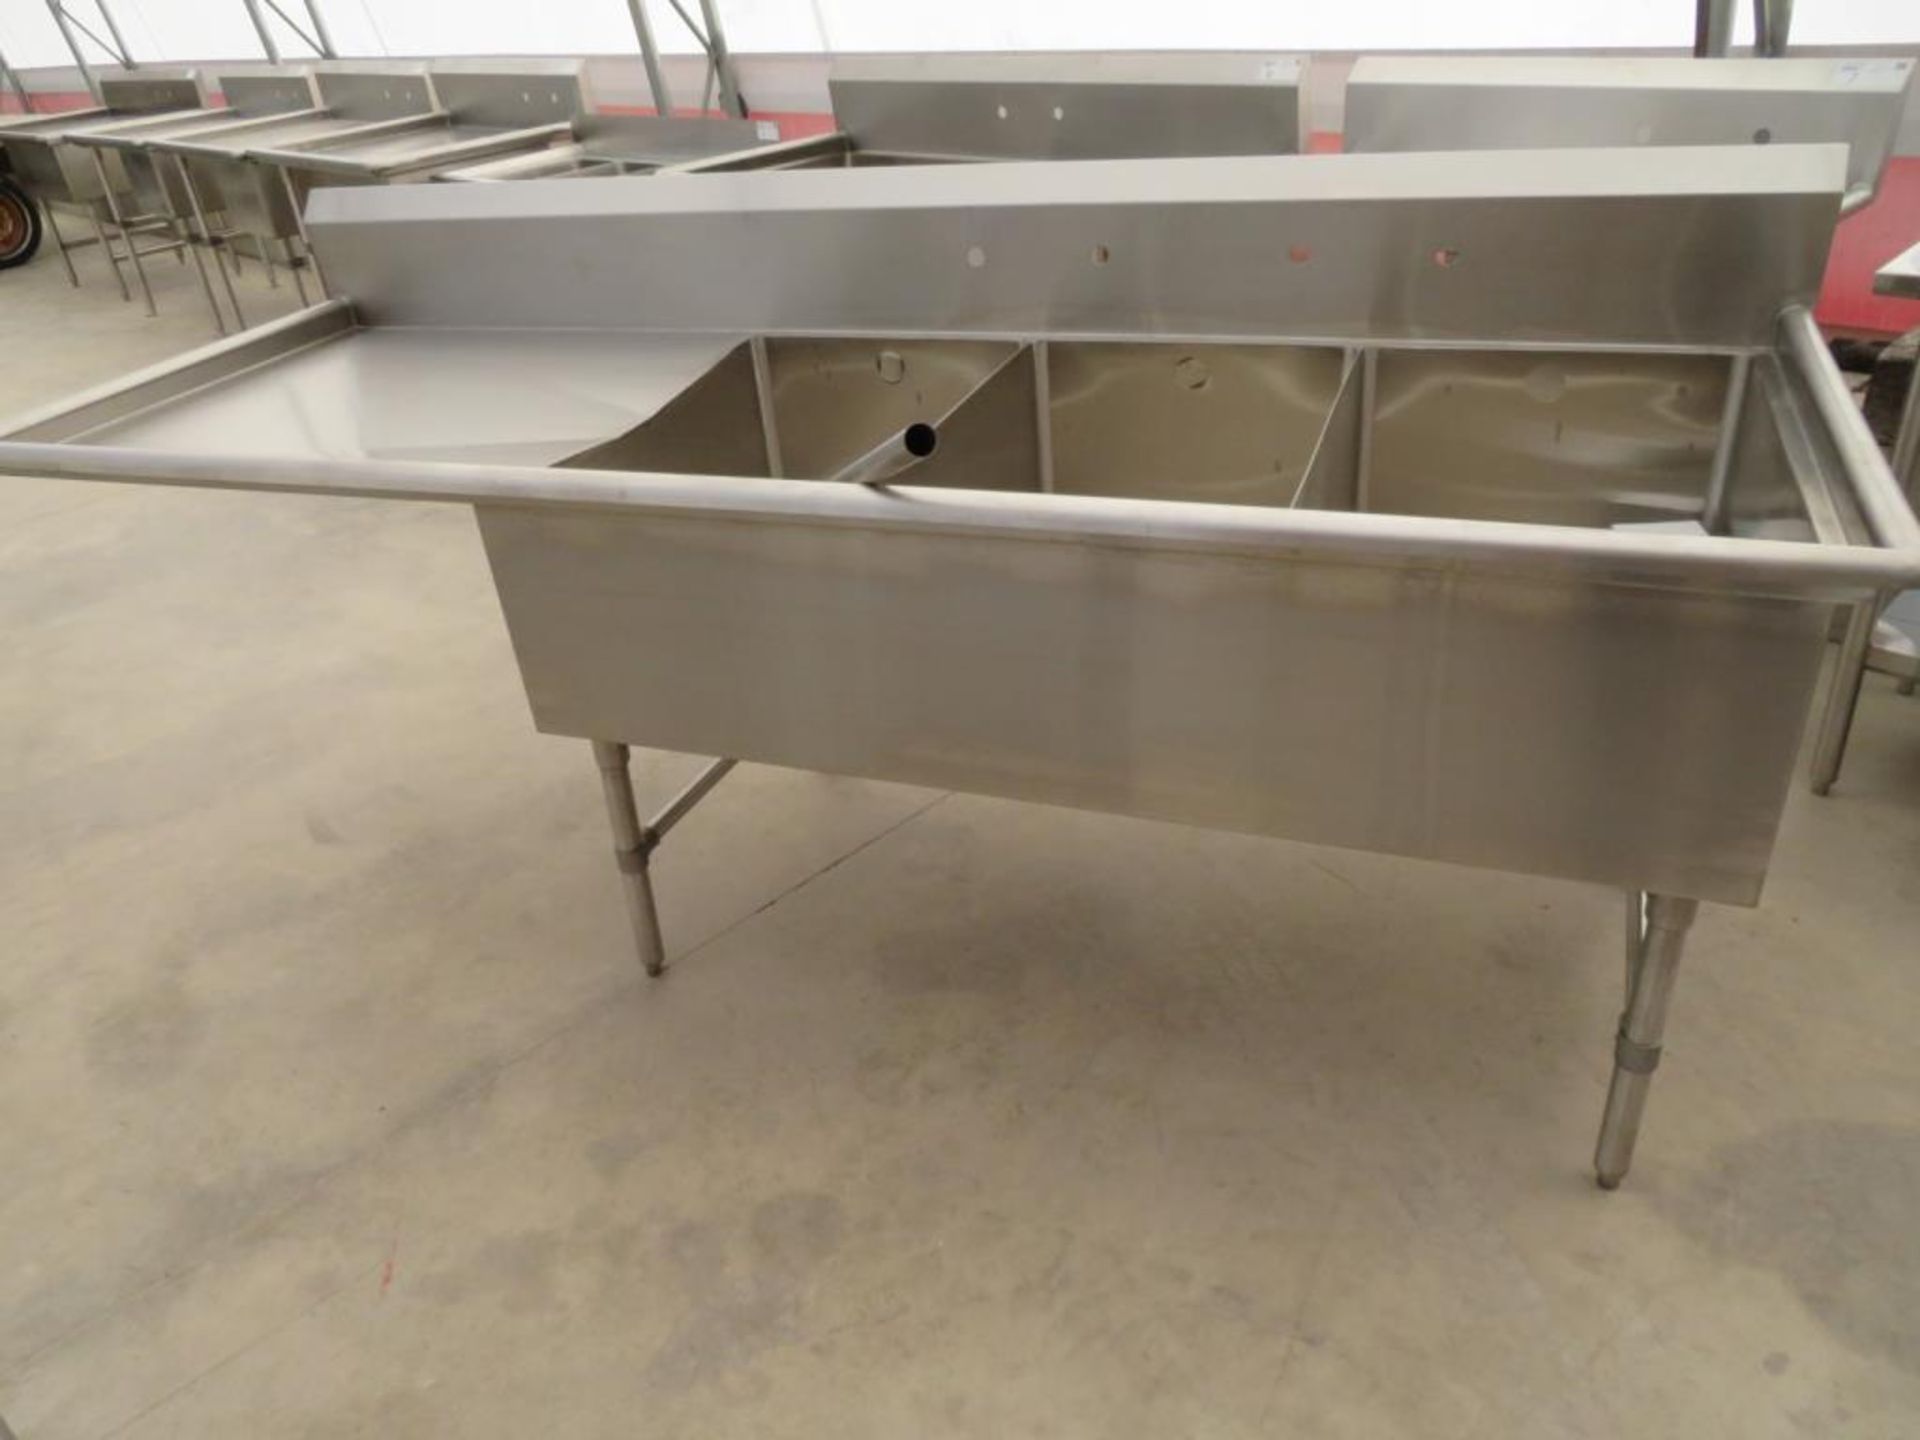 3 compartment sink, 3-20"x30" bowls with 2" overflow holes with 24" drainboard left